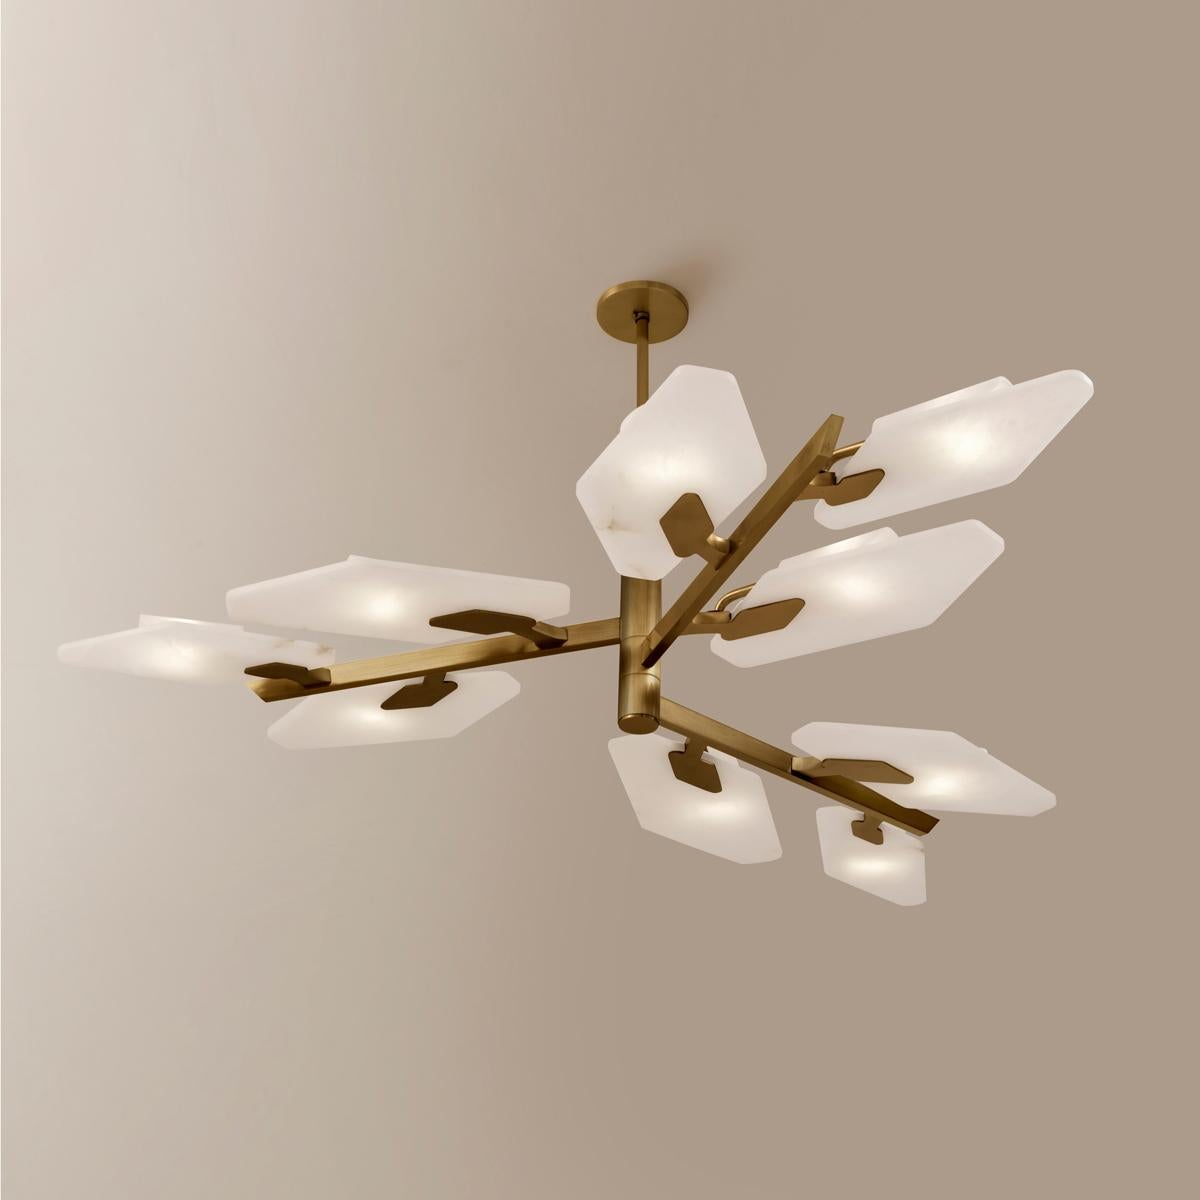 Leaf Ceiling Light by Gaspare Asaro-Satin Brass Finish For Sale 2